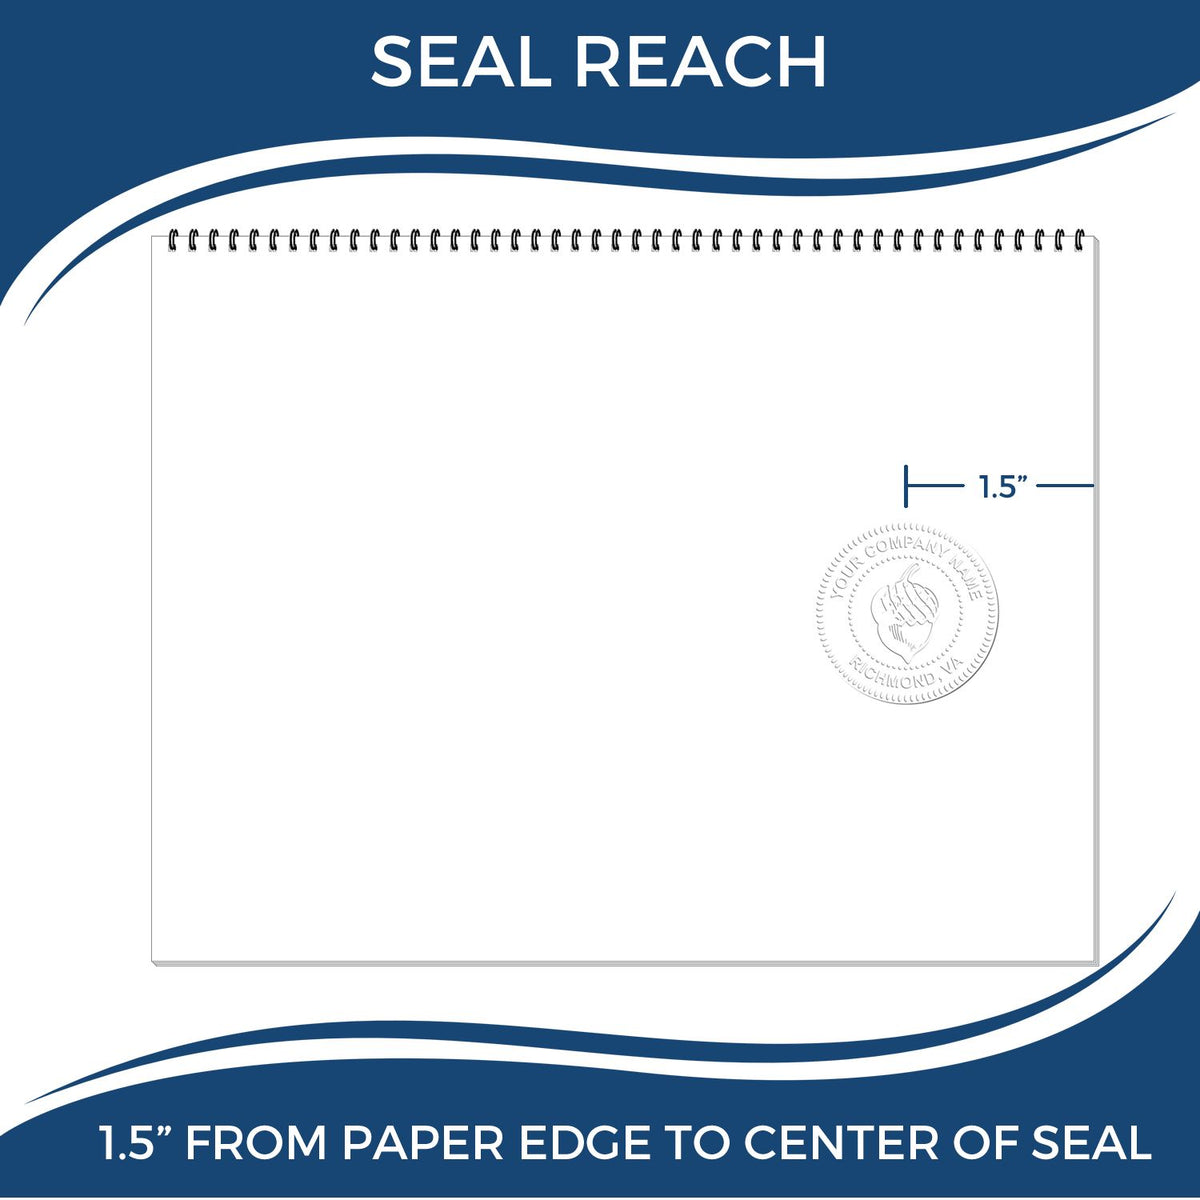 An infographic showing the seal reach which is represented by a ruler and a miniature seal image of the Hybrid Pennsylvania Engineer Seal